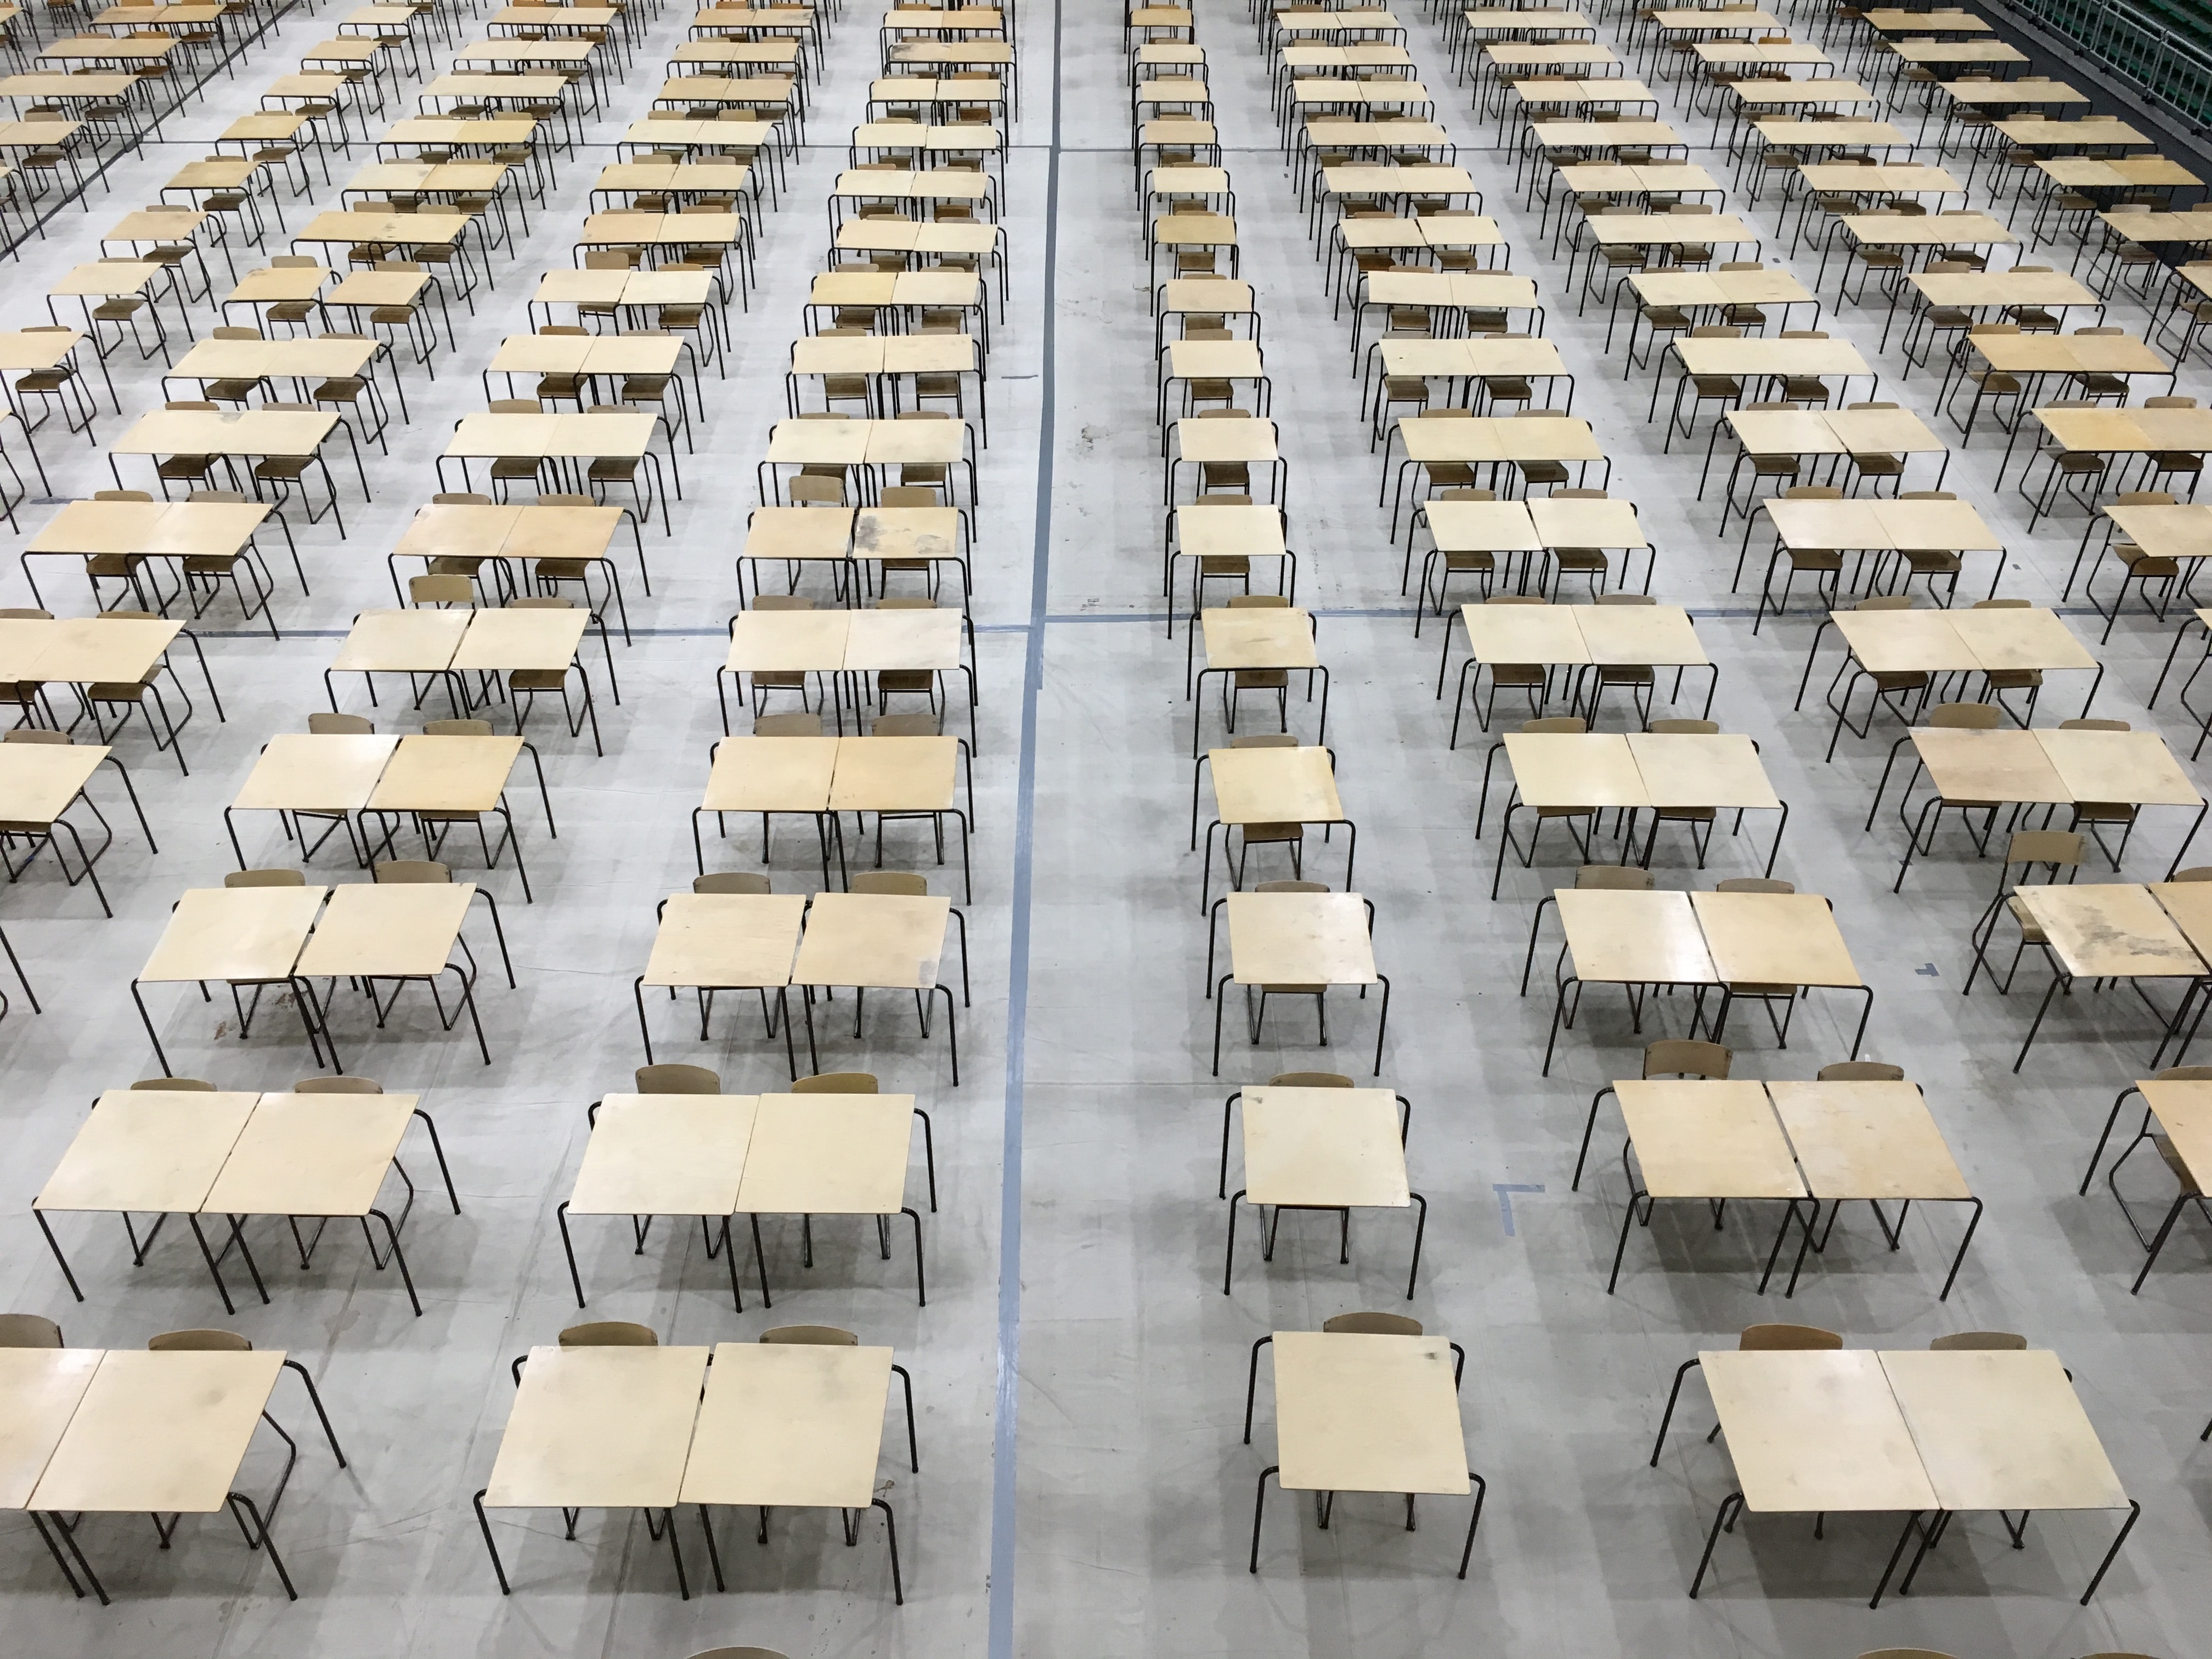 An empty row of desks set up for taking a test.